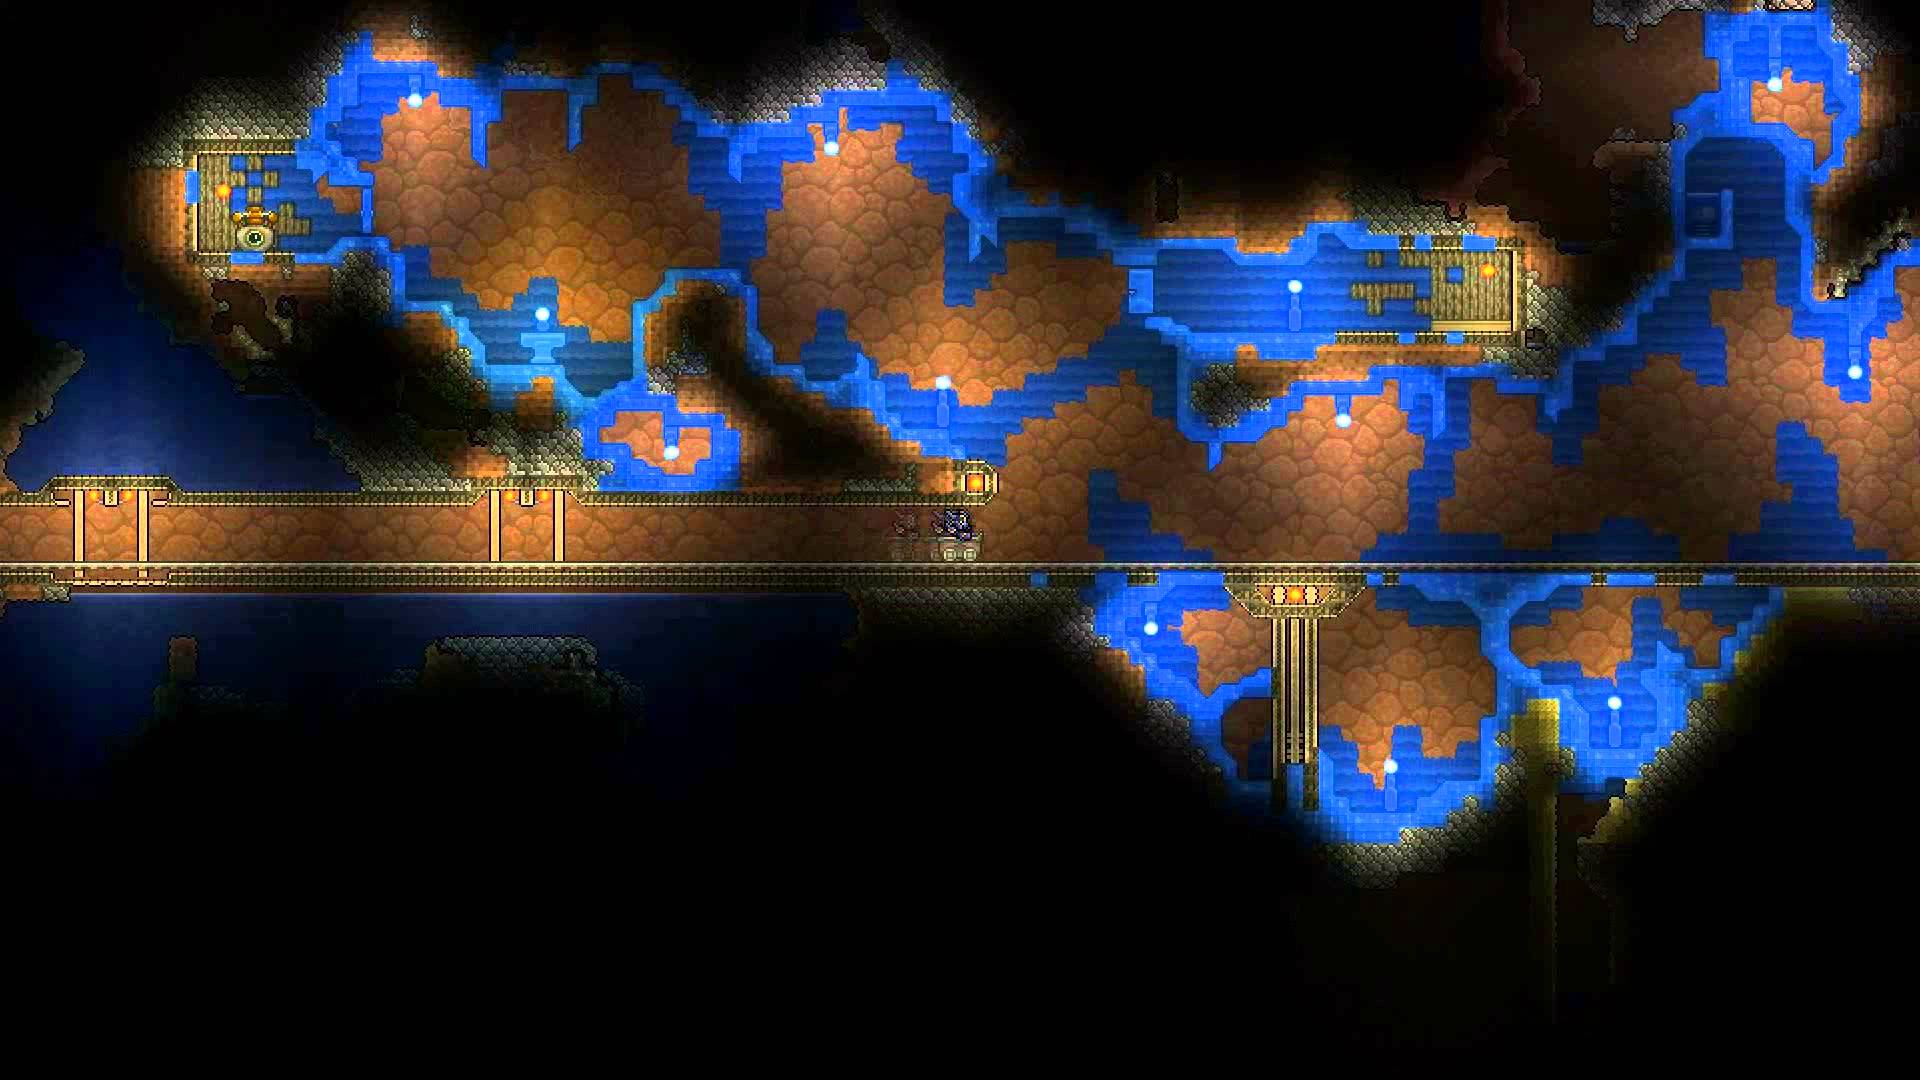 See Minecarts in Action in the Latest Terraria Update